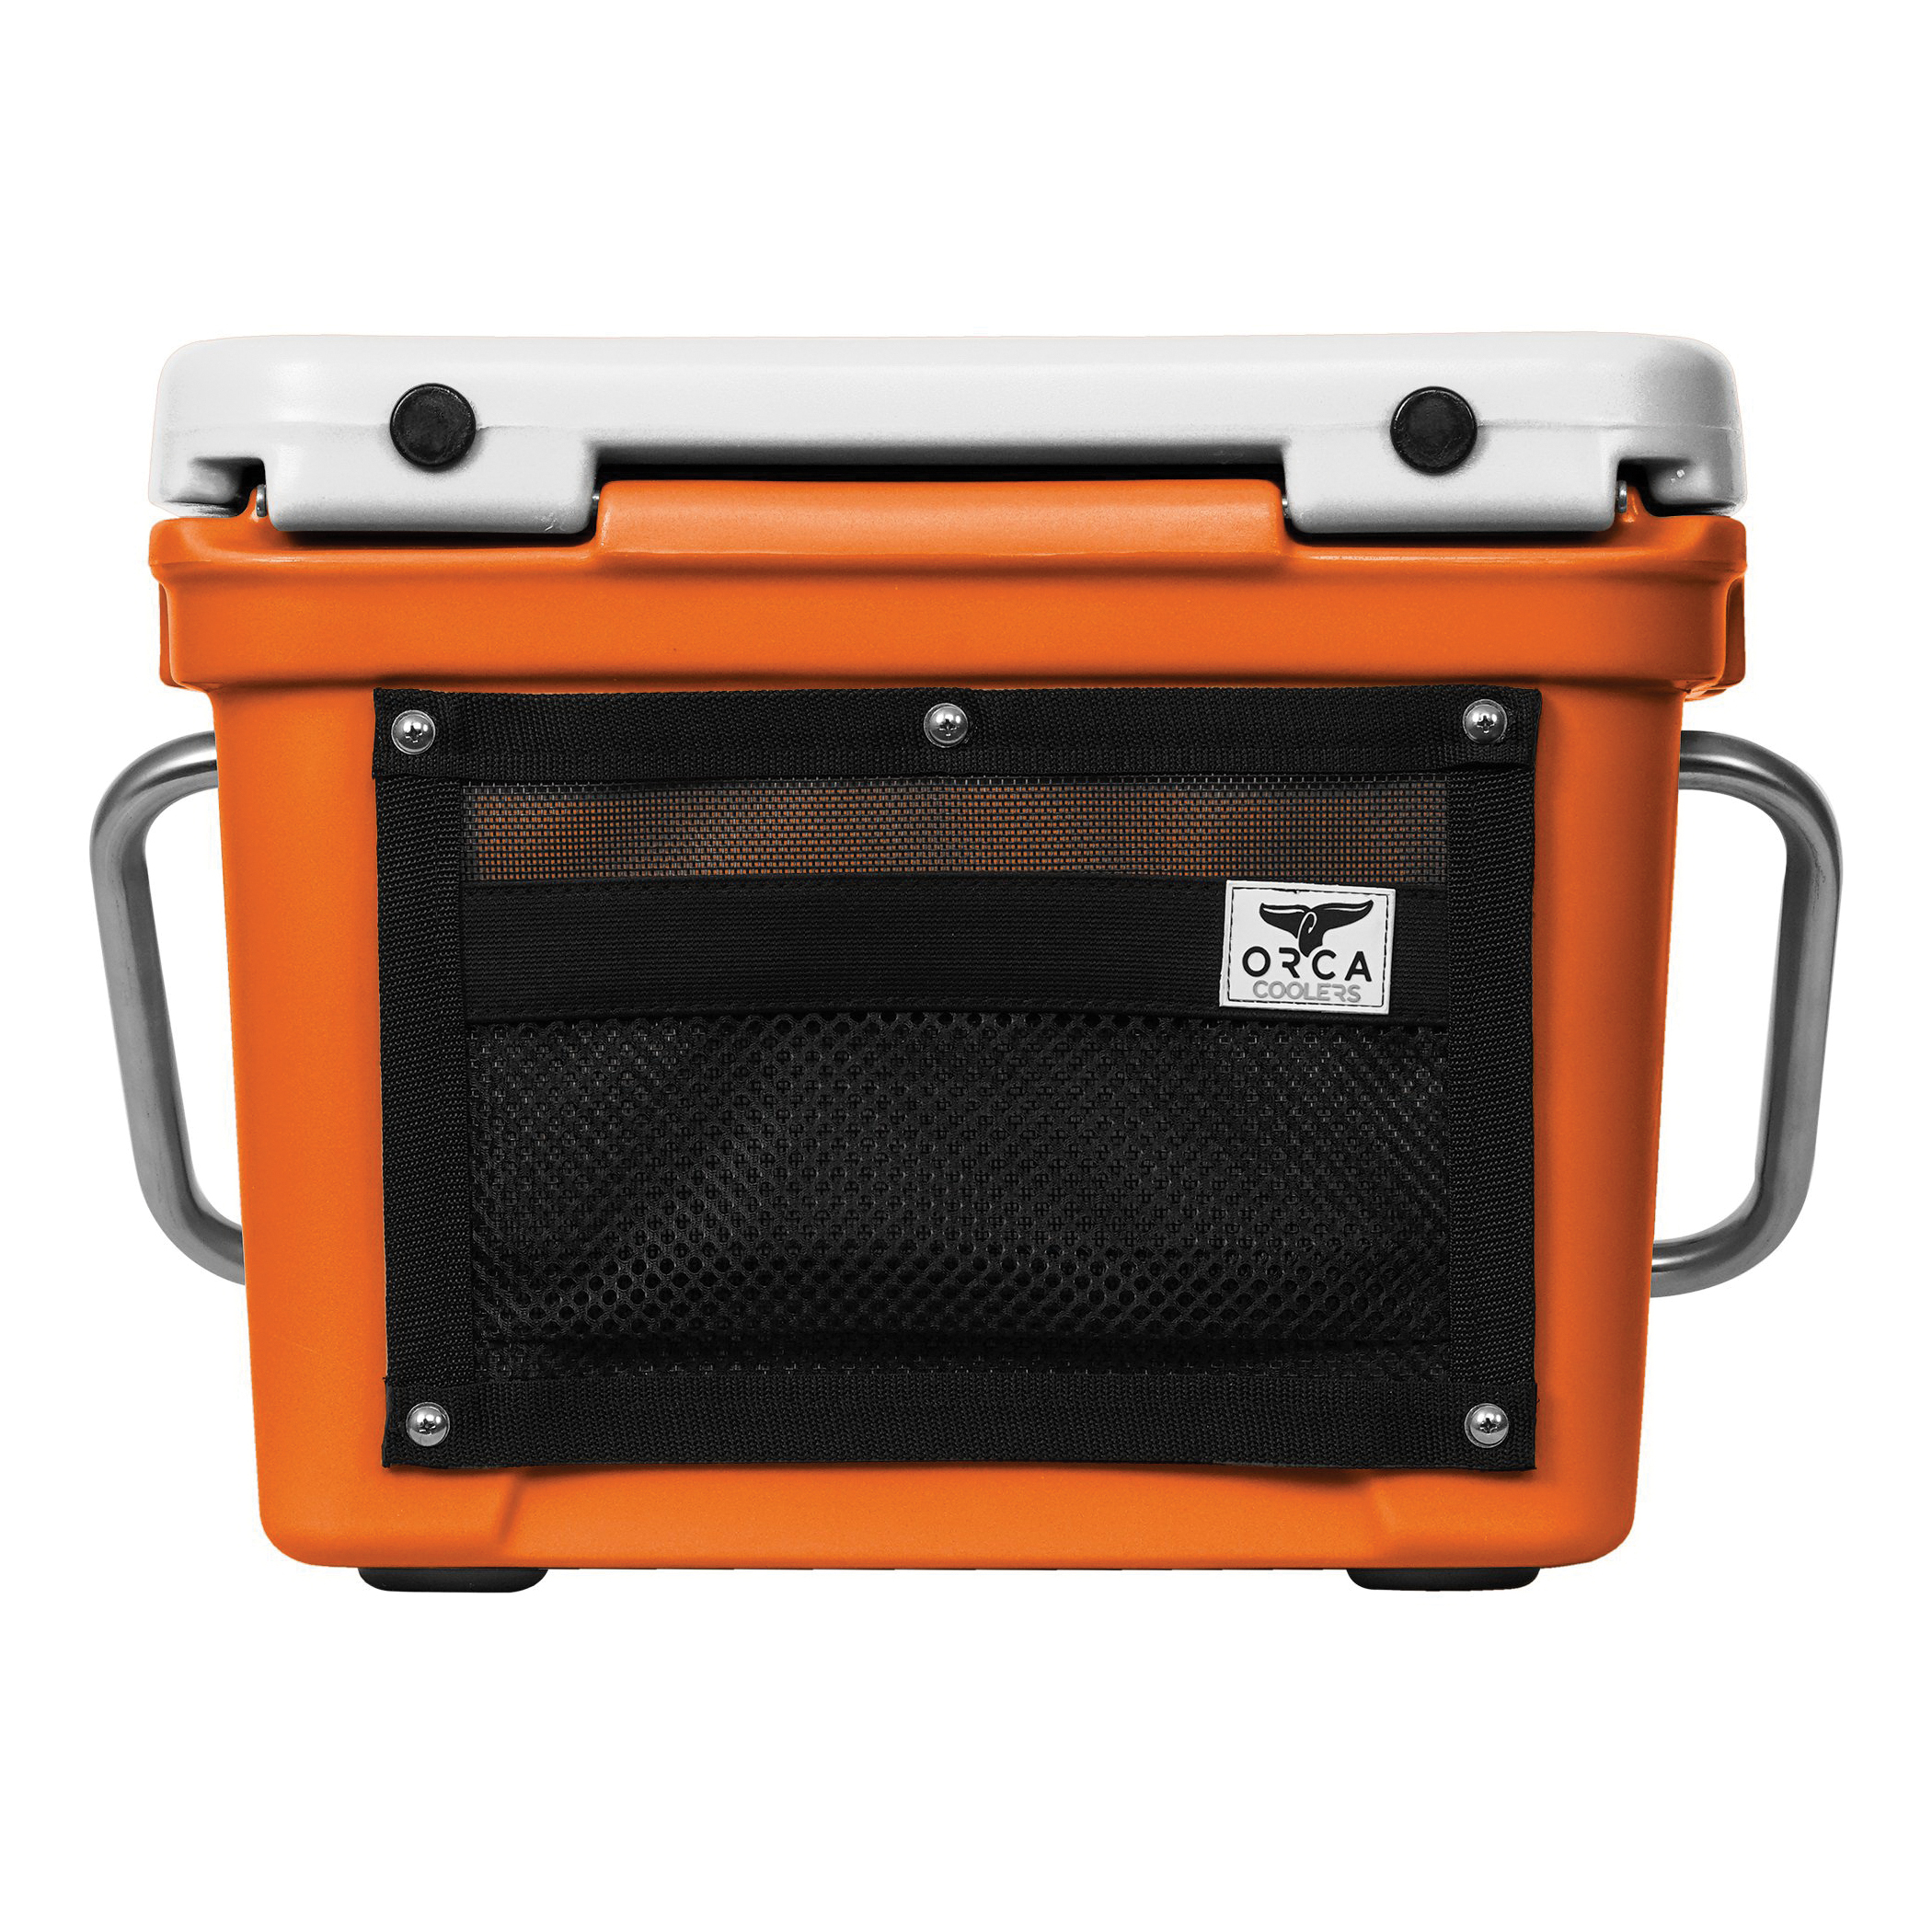 ORCA ORCBO/WH020 Cooler, 20 qt Capacity, Orange/White - 4